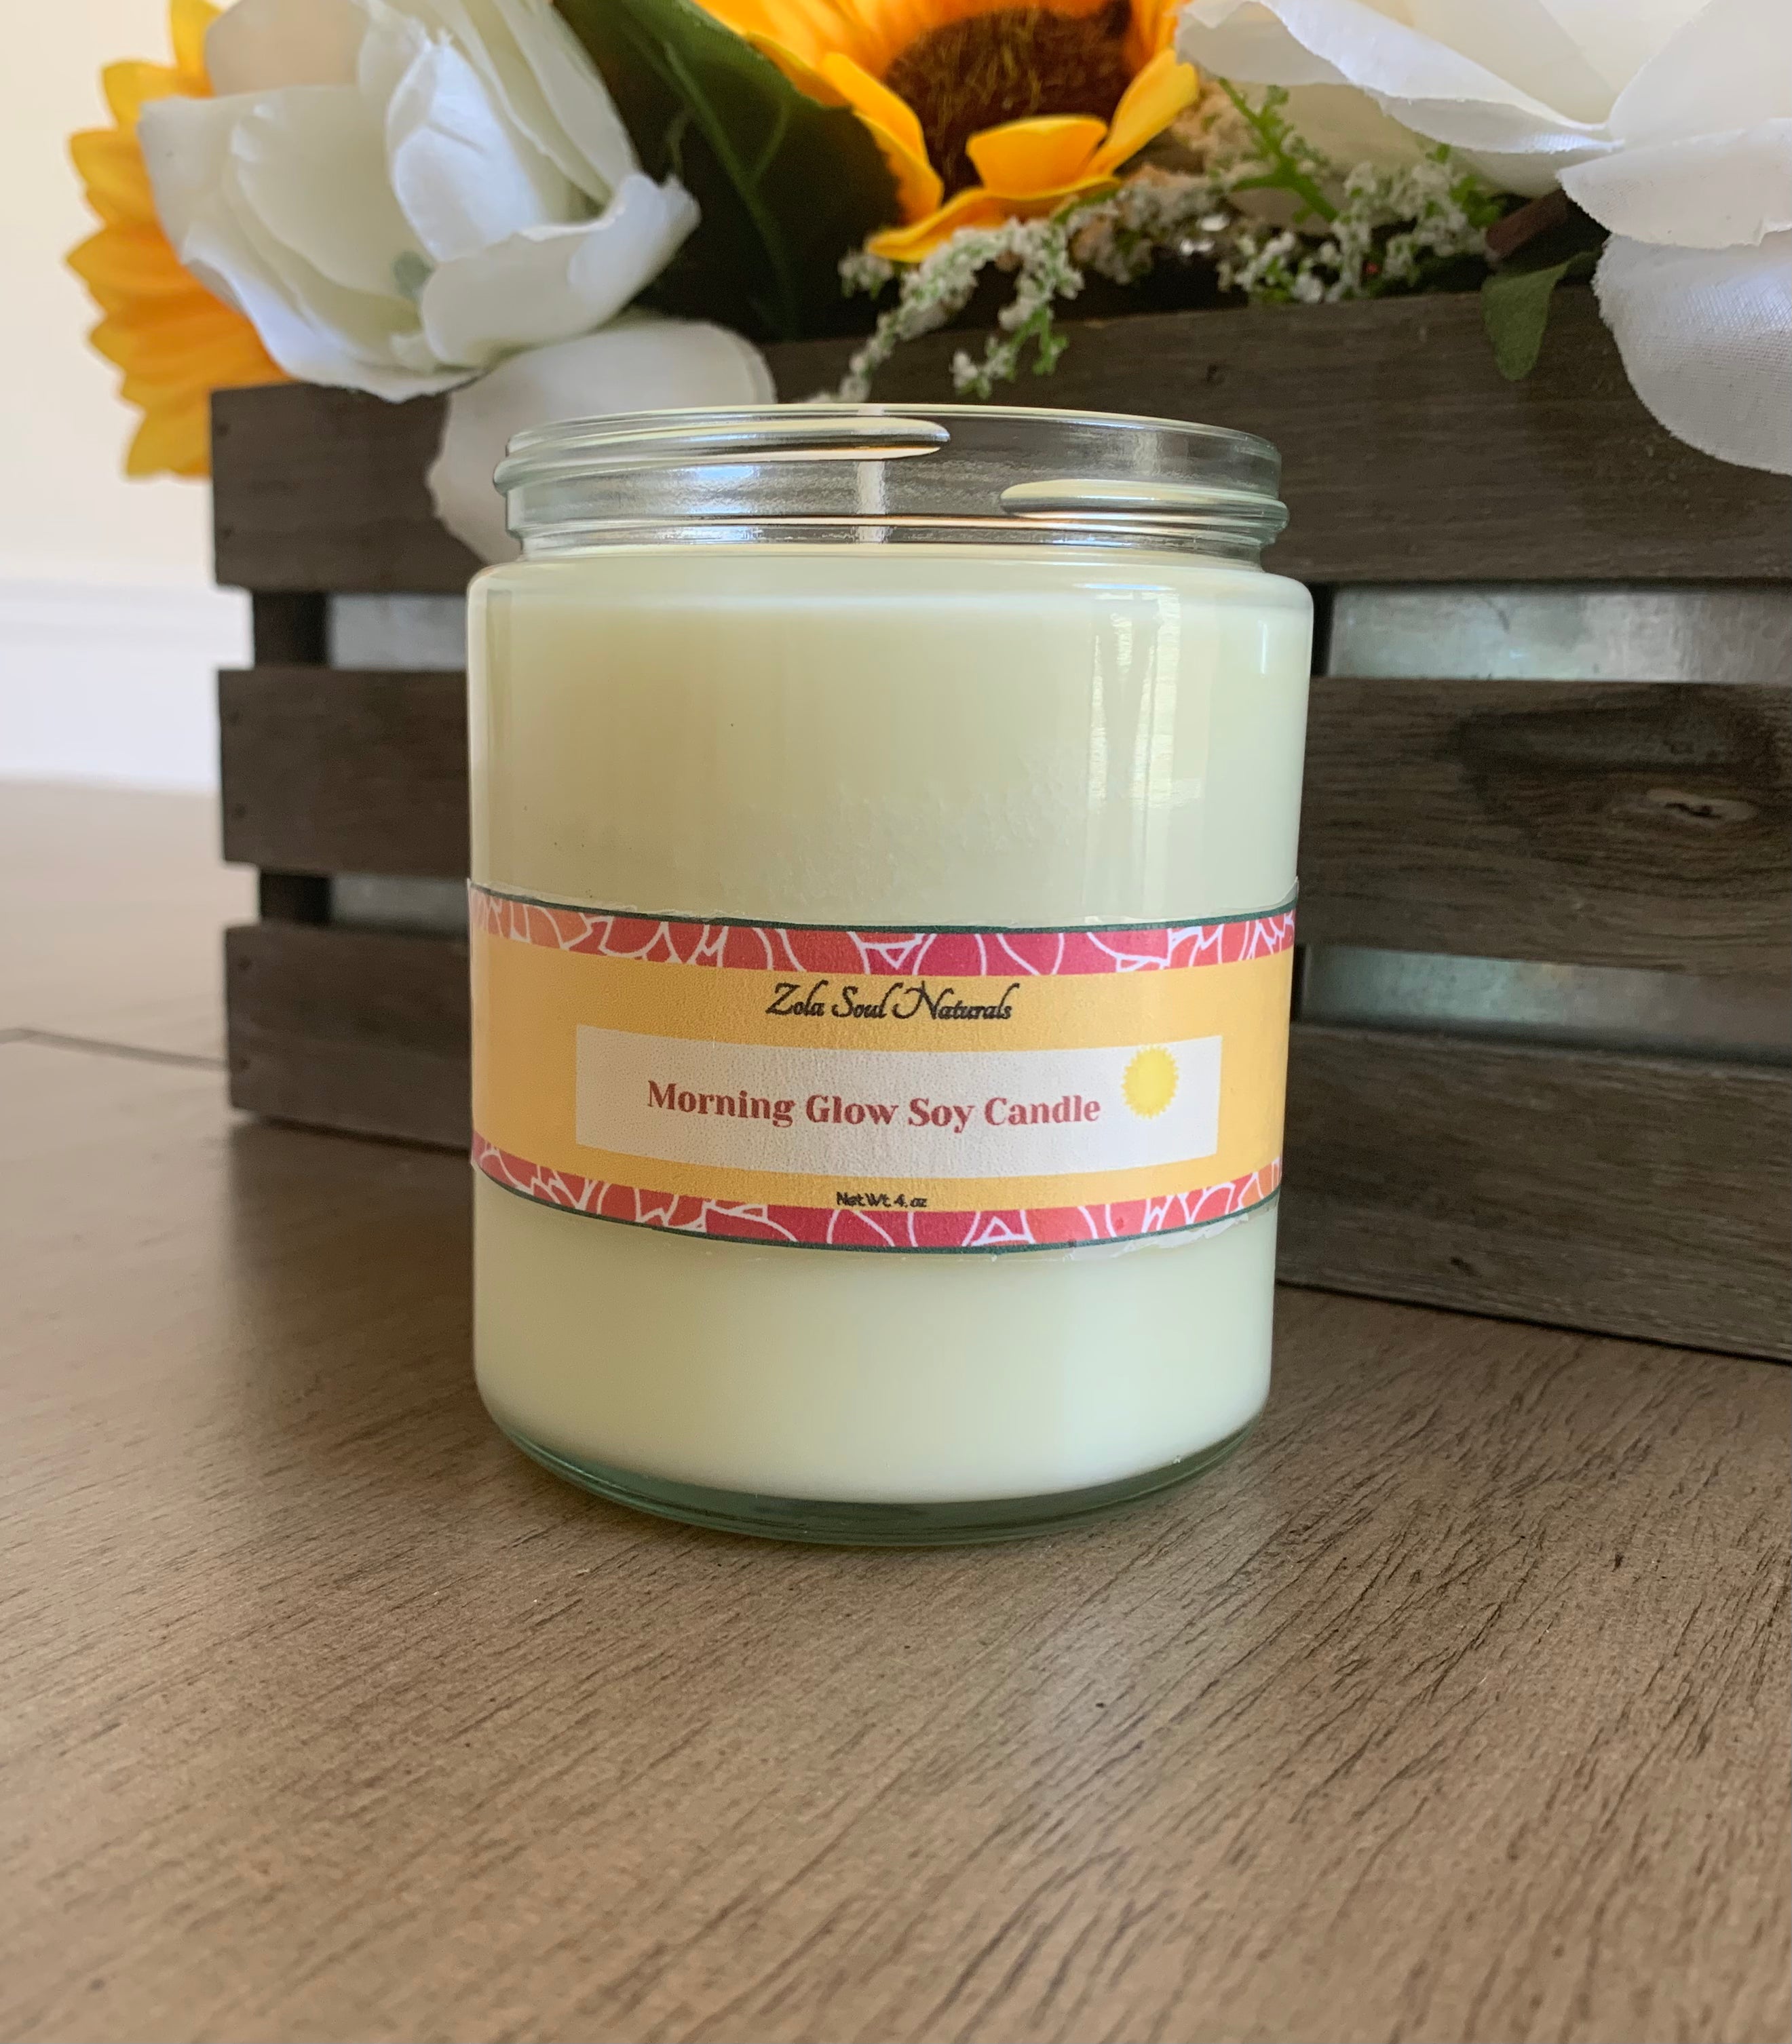 Morning Glow Soy Candle – Zola Soul Naturals